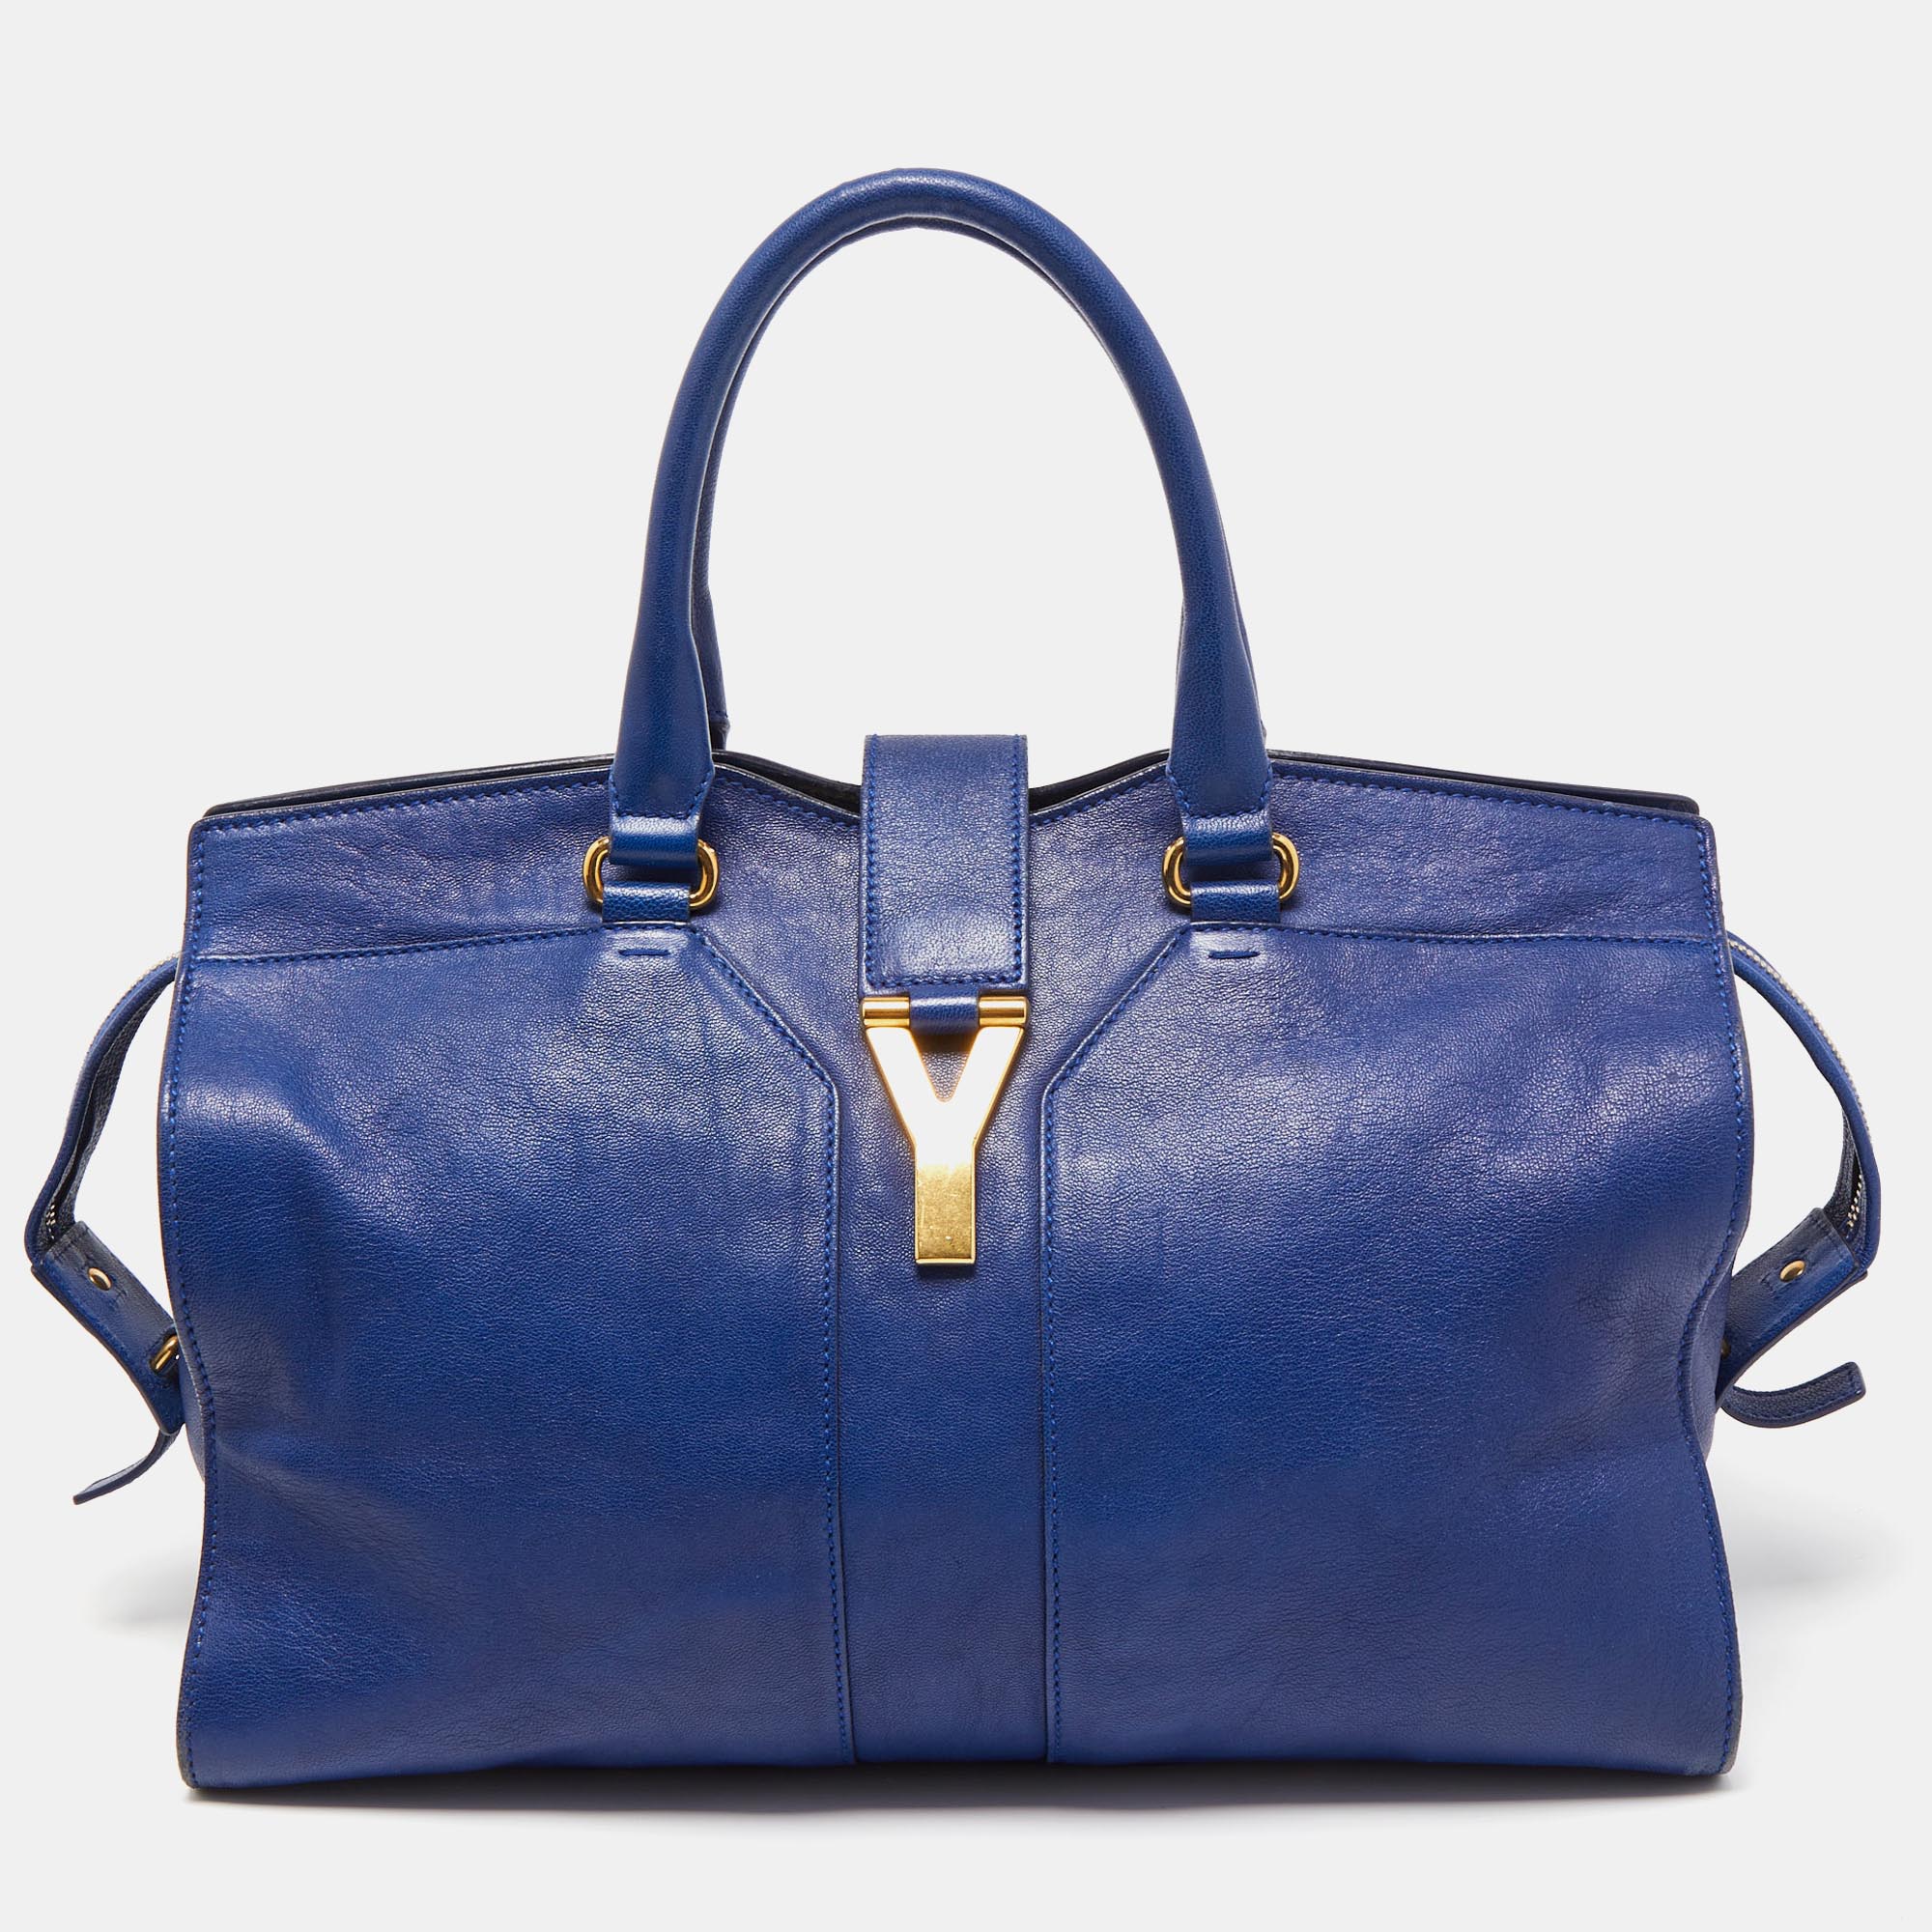 Pre-owned Saint Laurent Blue Leather Medium Cabas Chyc Tote